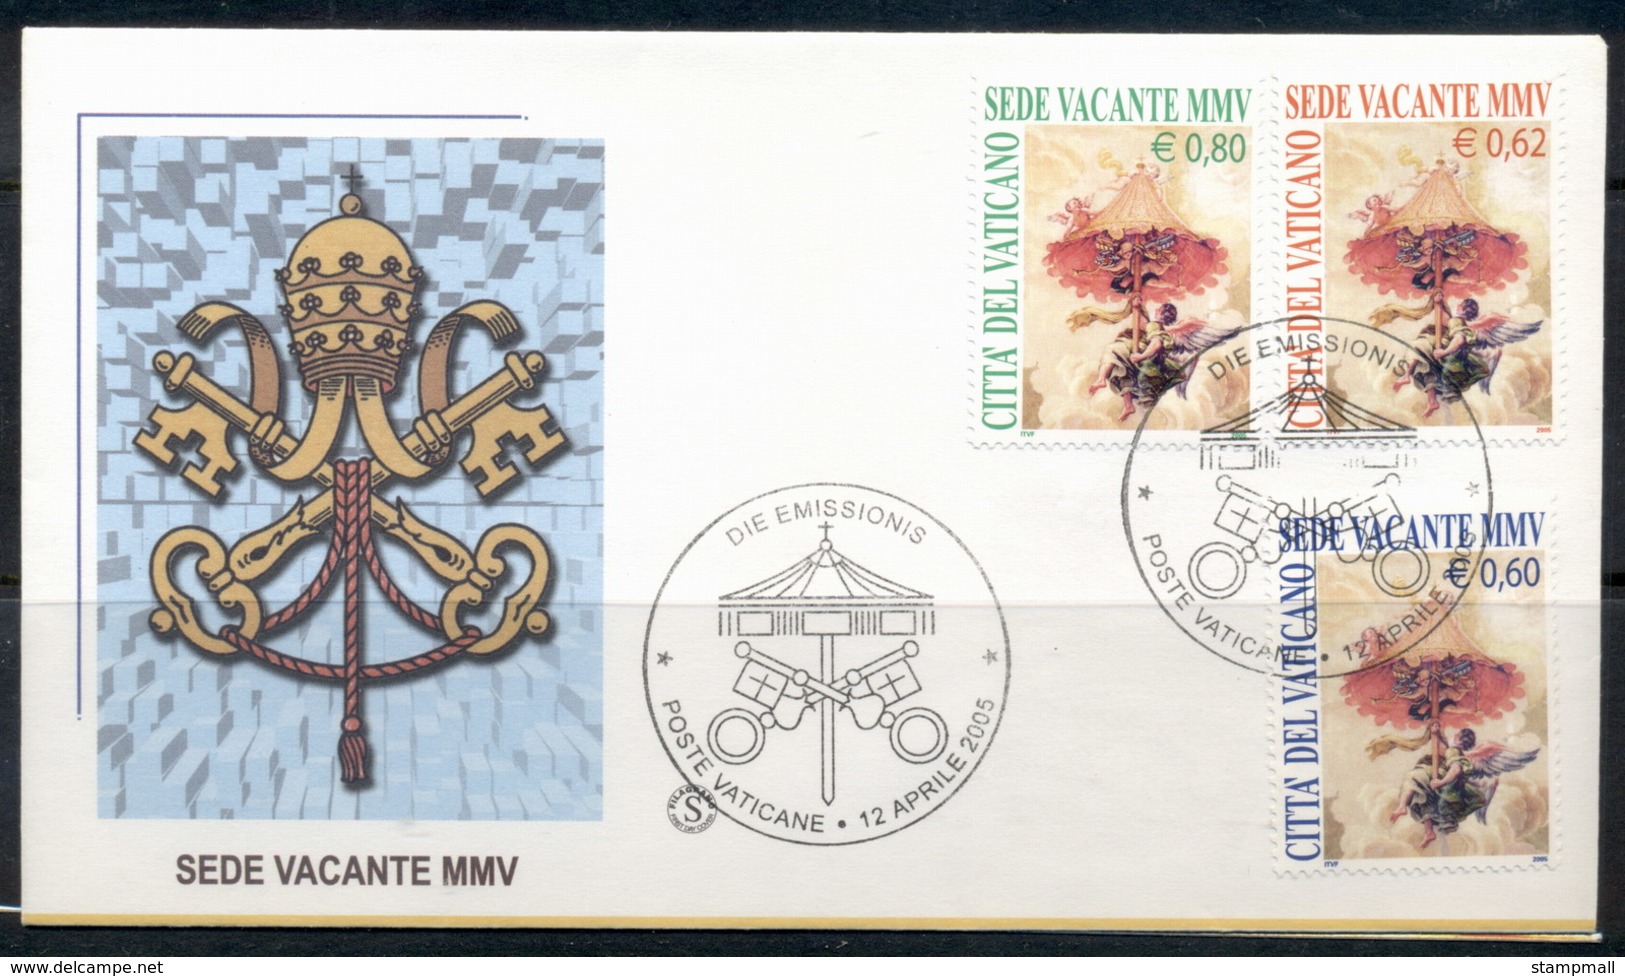 Vatican 2005 Arms Of St Peter & Papal Chemberlain's Isnignia FDC - FDC